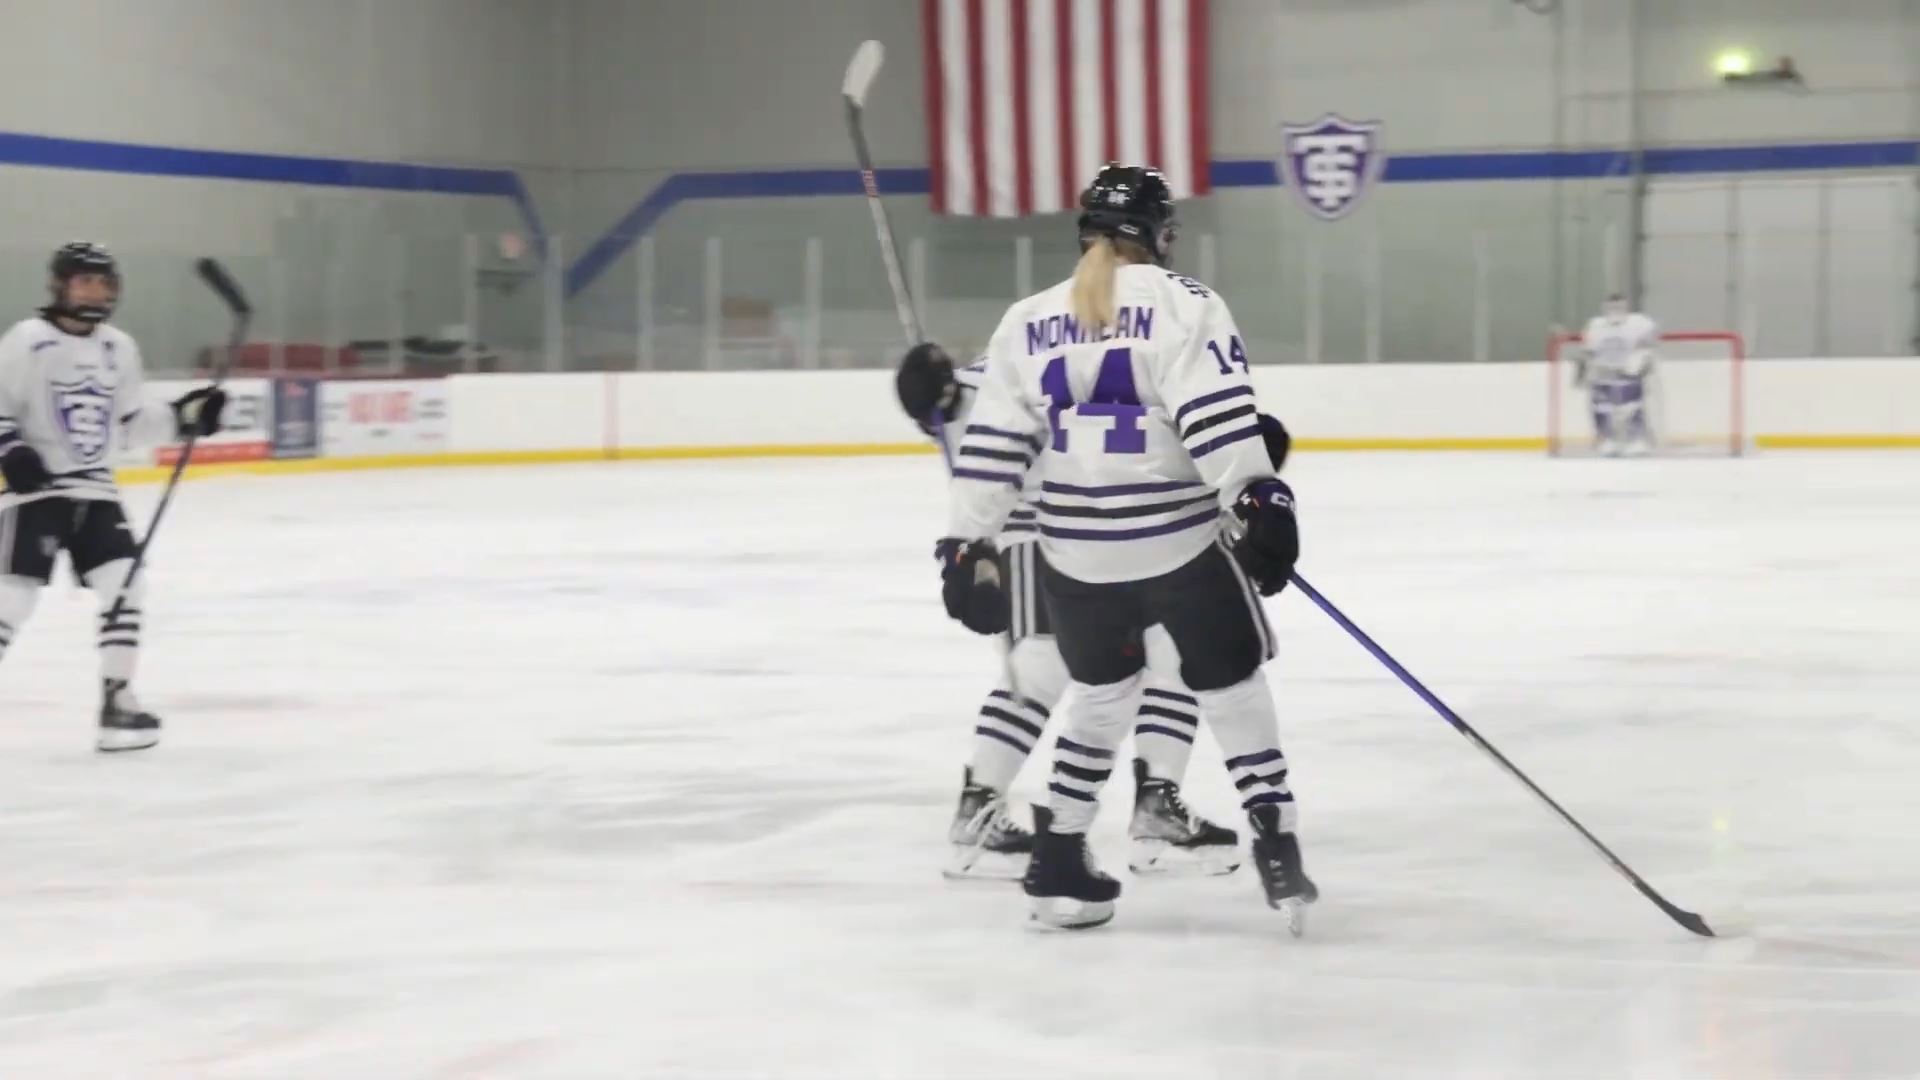 Female hockey players celebrate on the rink after a goal